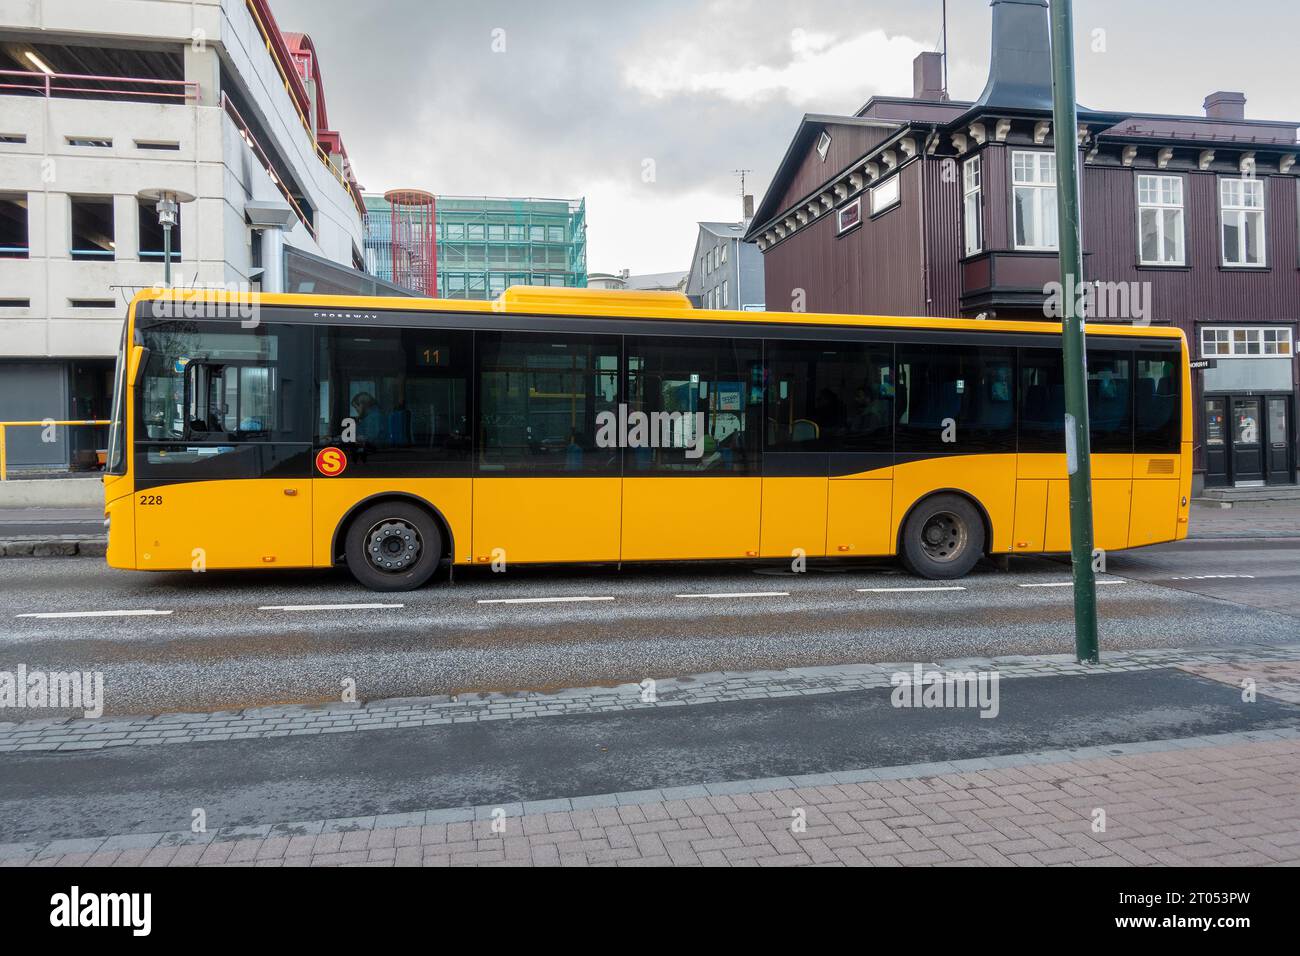 IVECO Bus Crossway Icelandic Yellow Public Bus In Downtown Reykjavik Iceland Stock Photo